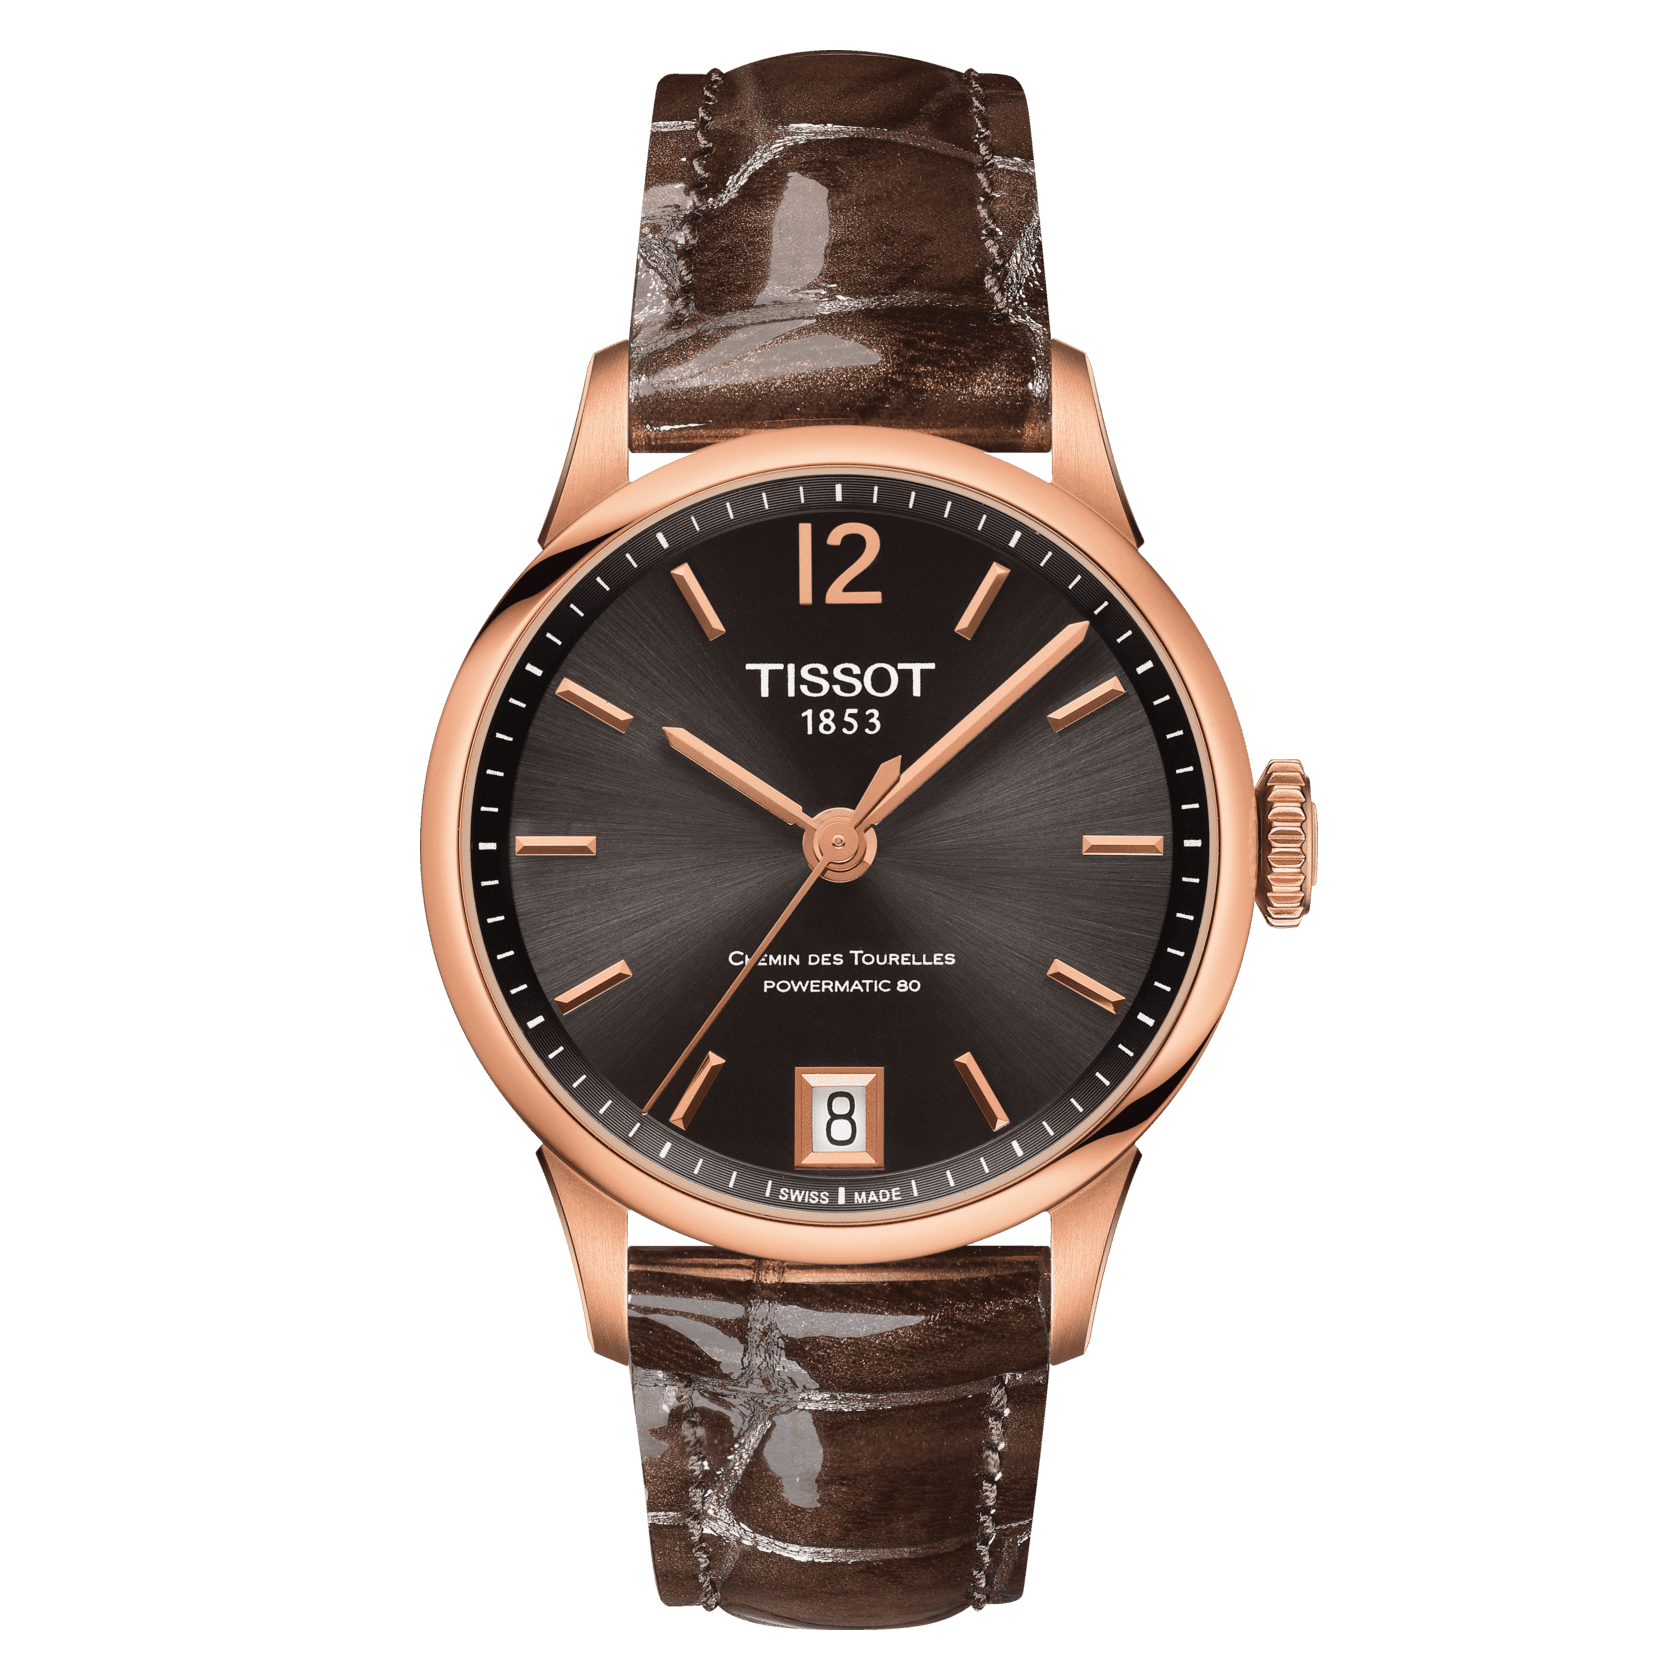 Fortis Replication Watches